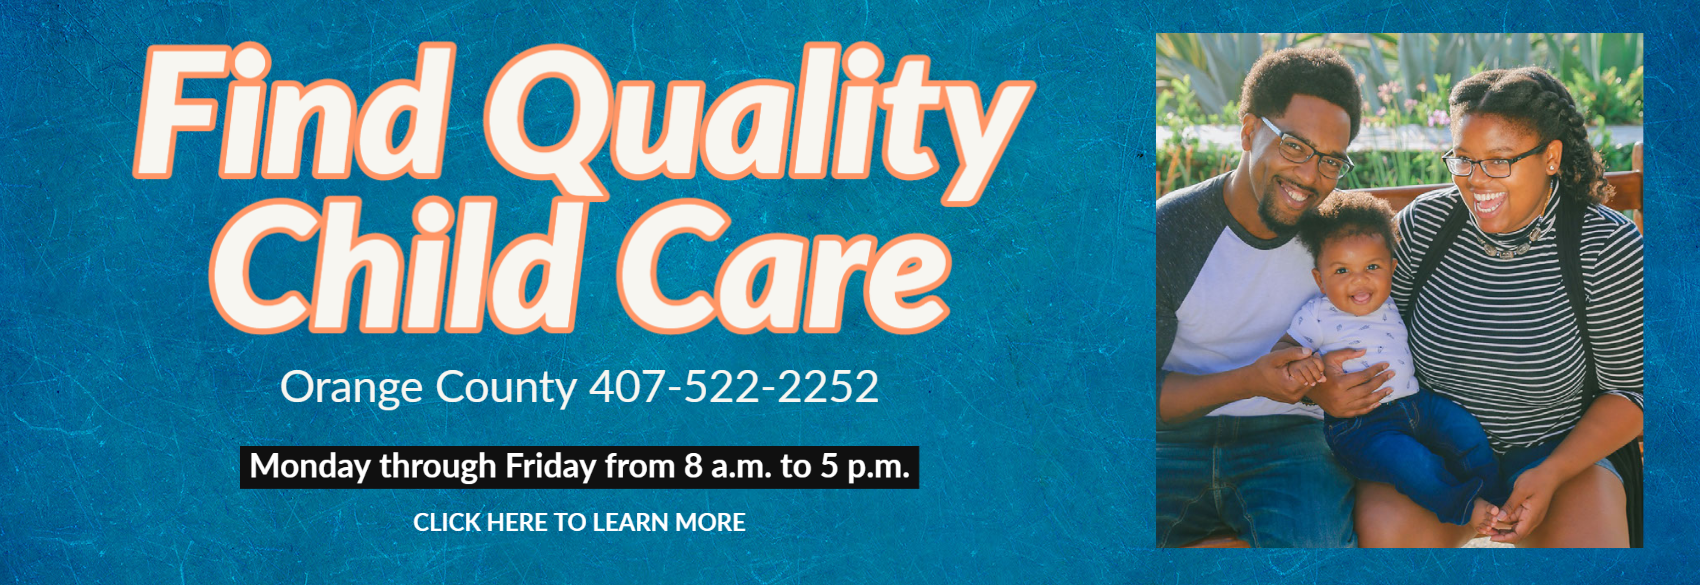 Find Quality Child Care